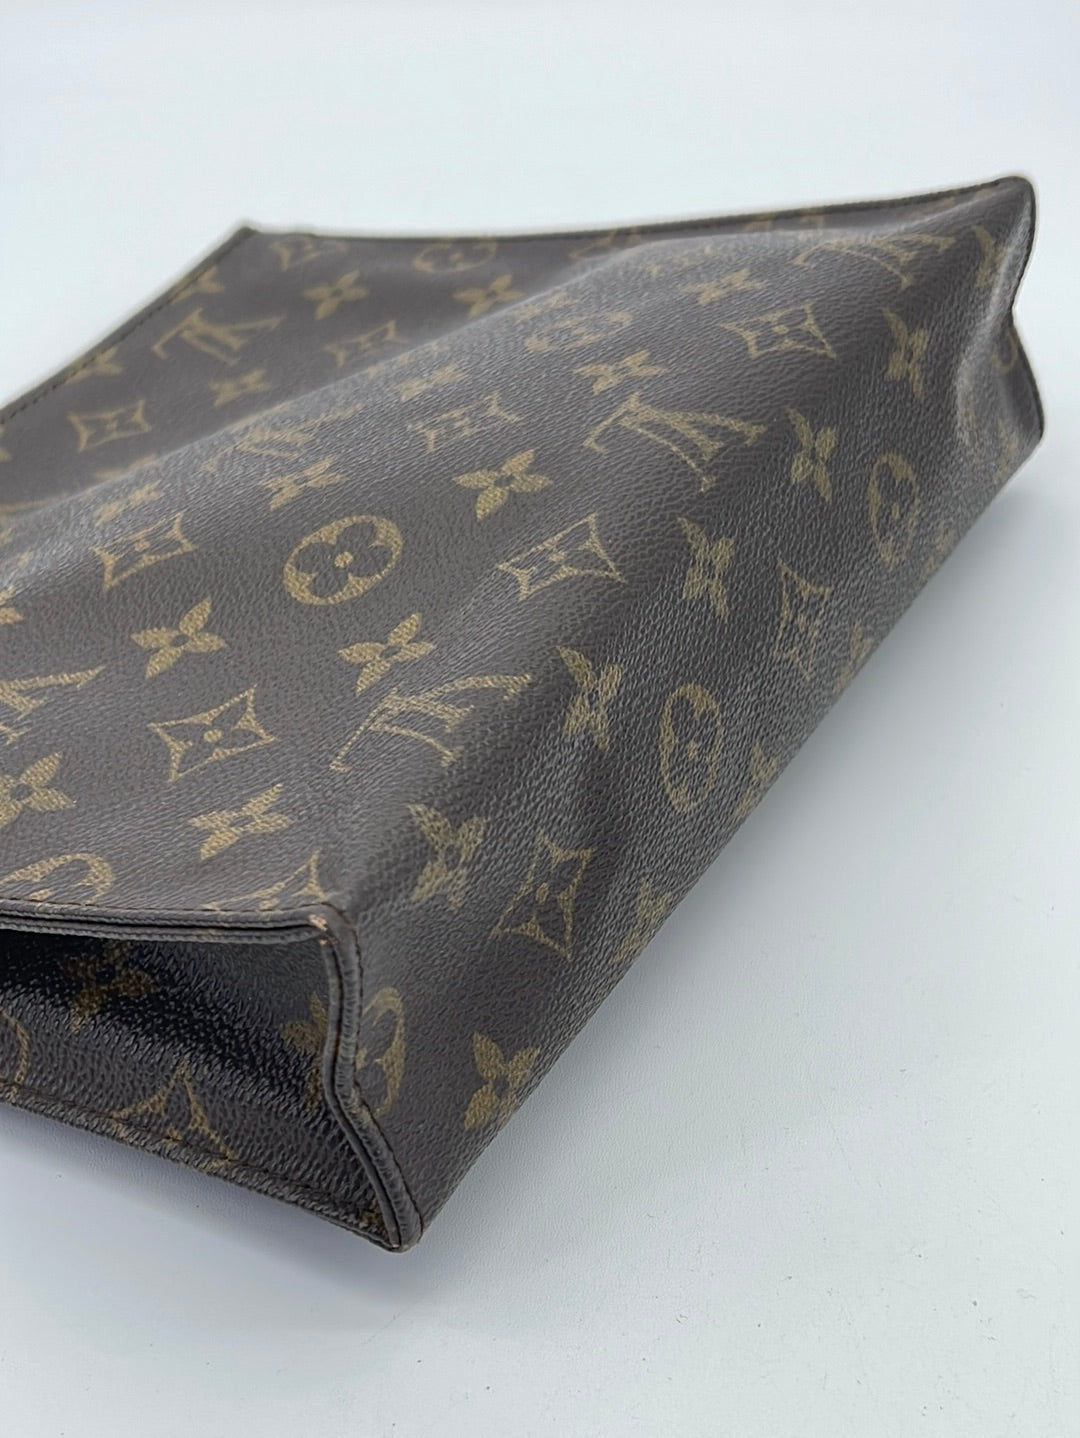 LOUIS VUITTON Vintage Monogram Toiletry Pouch 26 – Collections Couture